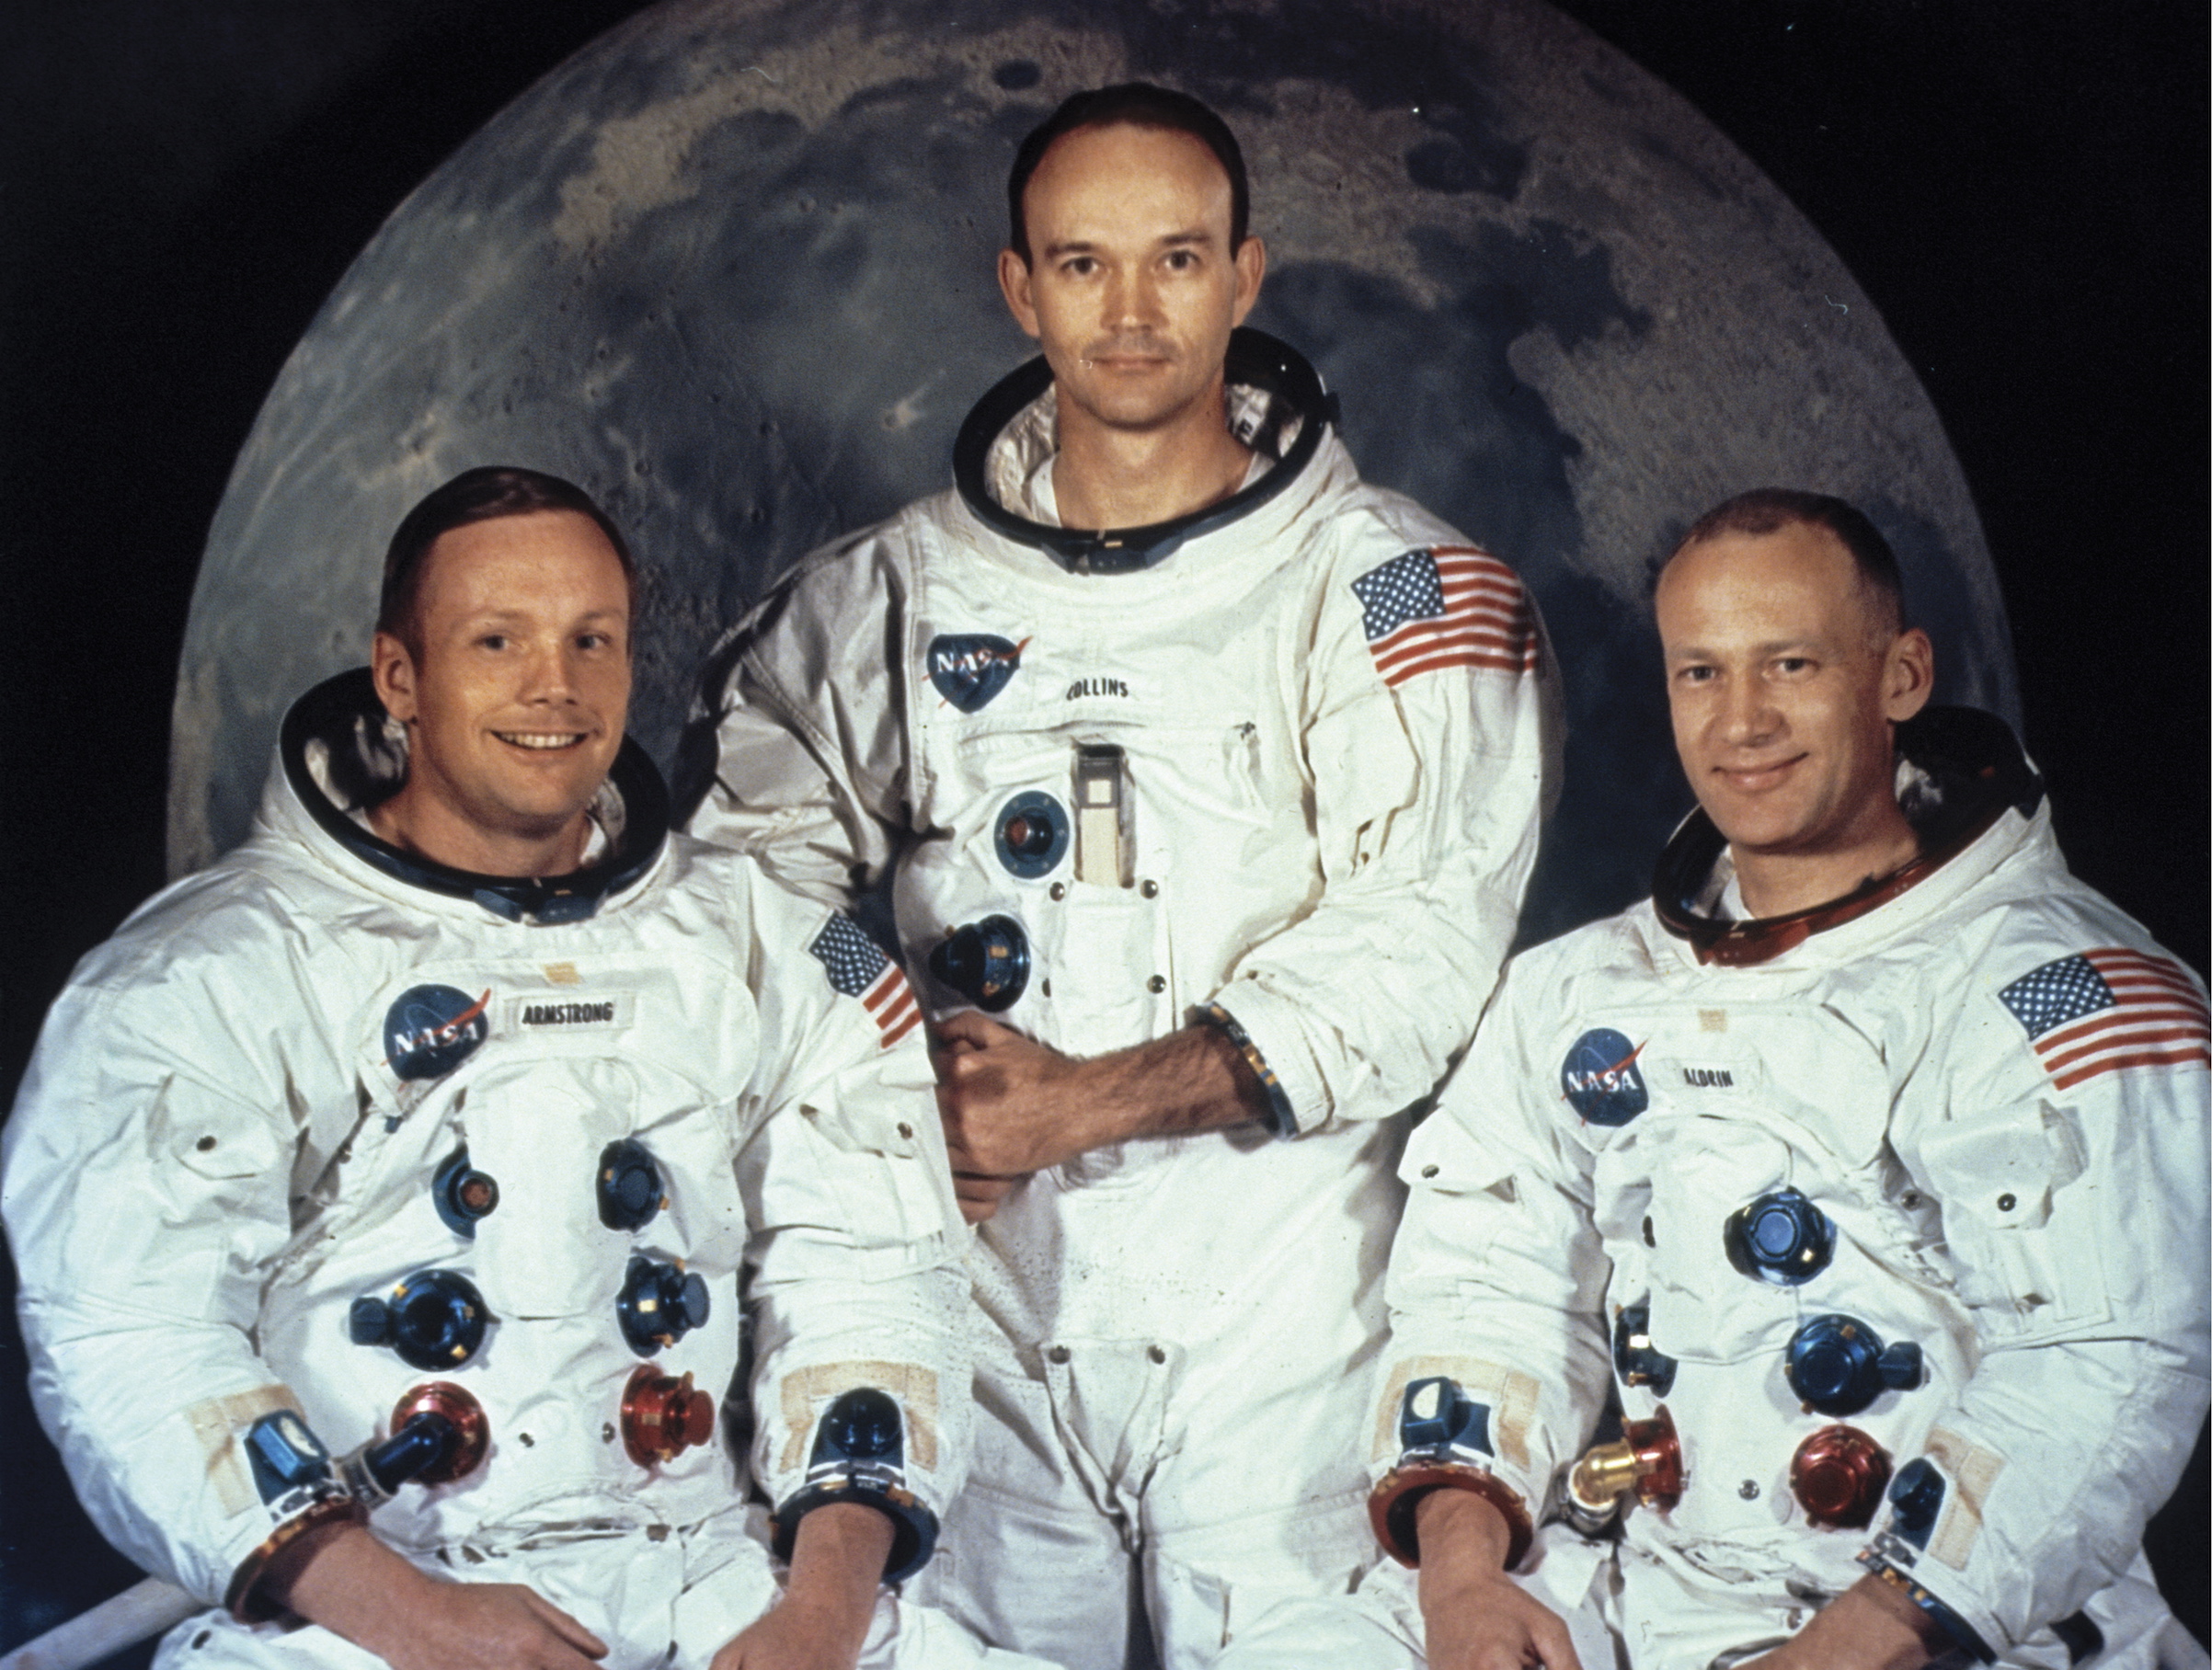 Apollo 11 astronauts Neil Armstrong, Michael Collins and Buzz Aldrin (Encyclopaedia Britannica/Universal Images Group/Getty)